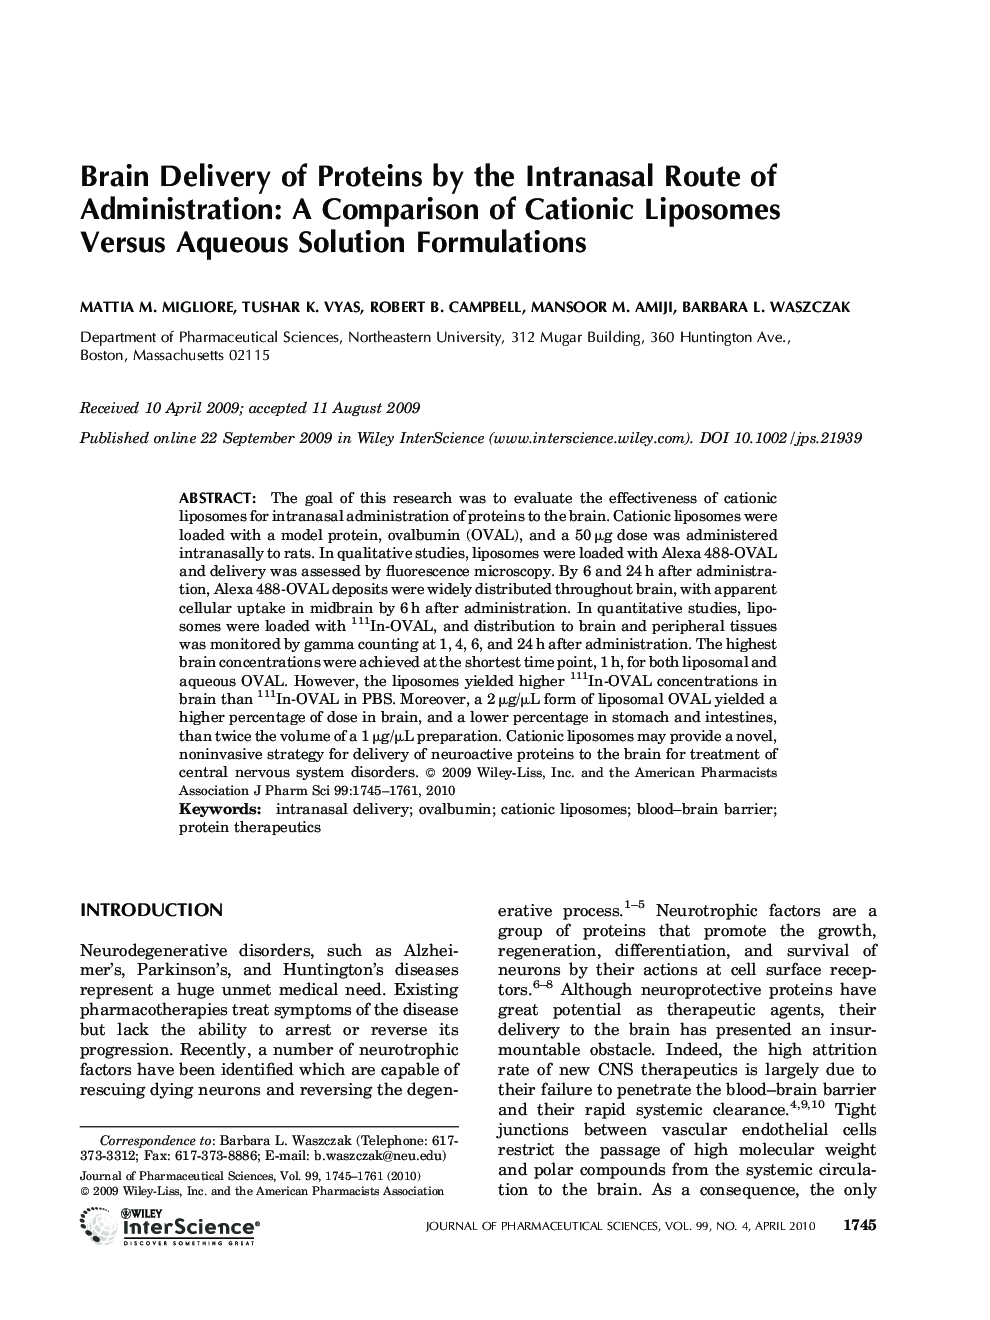 Brain delivery of proteins by the intranasal route of administration: A comparison of cationic liposomes versus aqueous solution formulations